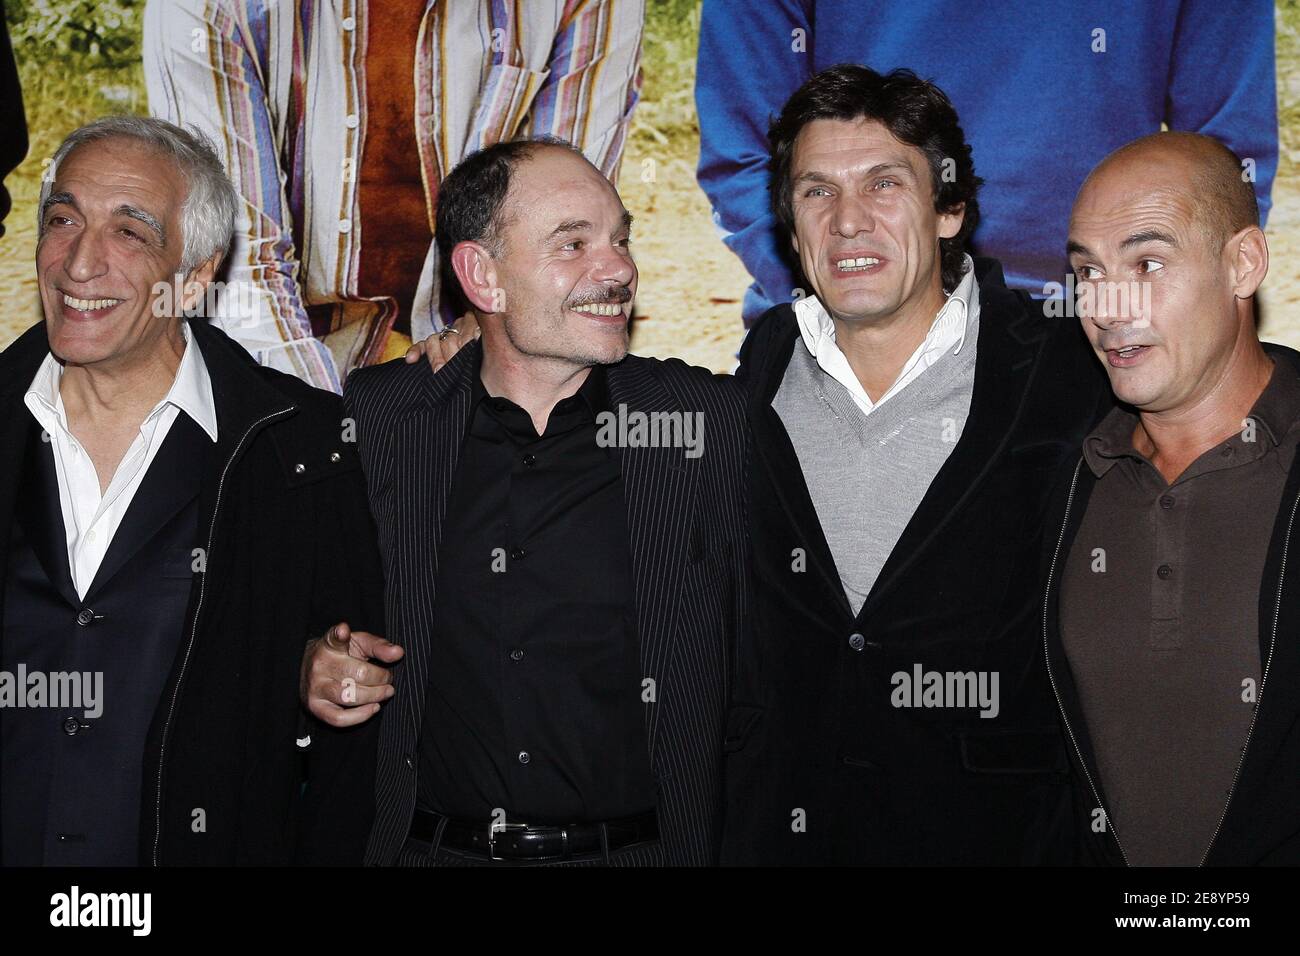 Gerard Darmon, Jean-Pierre Darroussin, Marc Lavoine, Bernard Campan attend the premiere of Le Coeur des Hommes 2, held at the Gaumont Marignan theater in Paris, France, on October 15, 2007. Photo by Thierry Orban/ABACAPRESS.COM Stock Photo